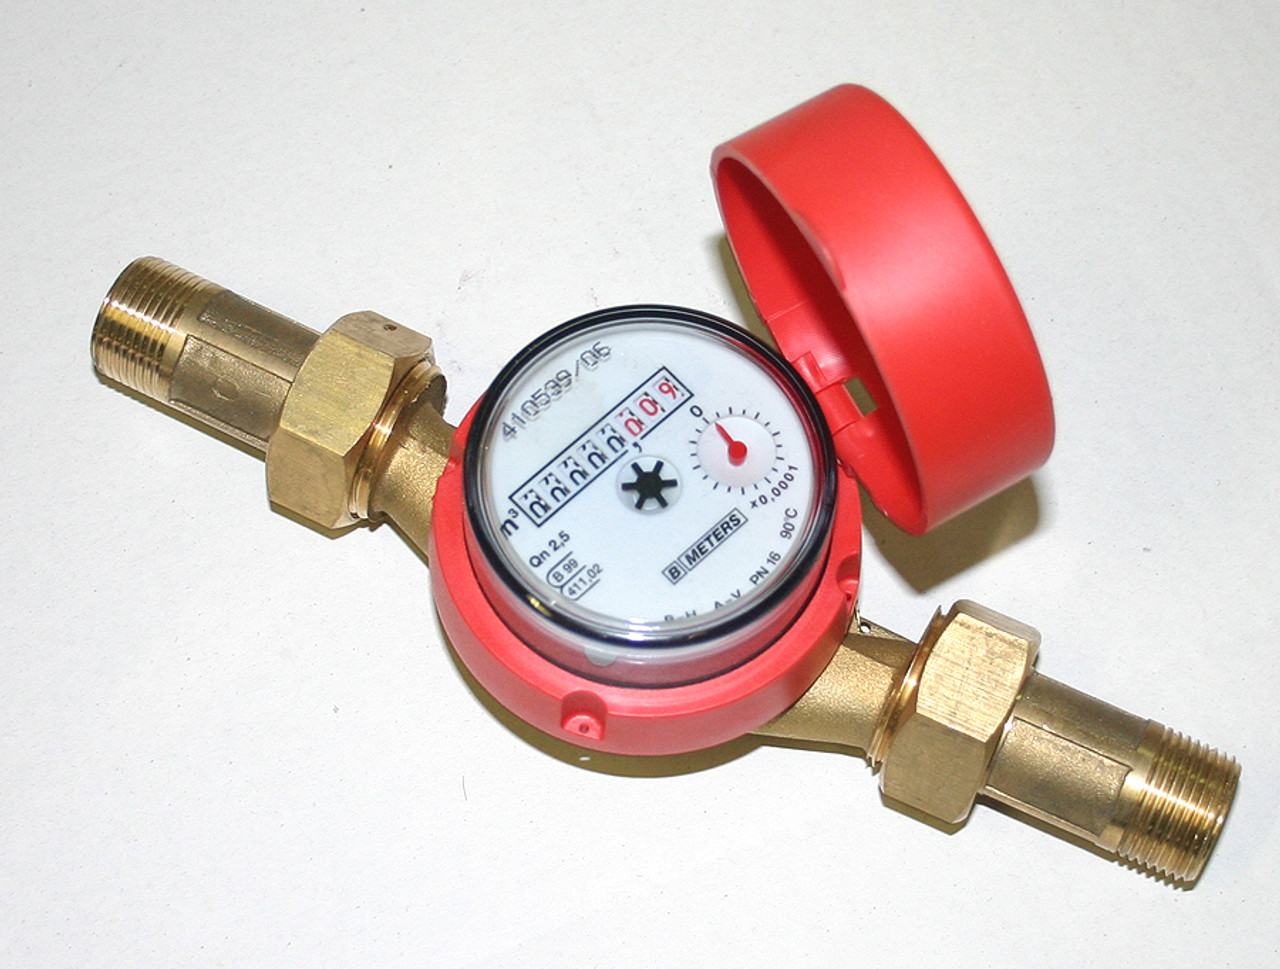 GSD8 Single-Jet 20mm or 3/4" HOT Water Meter (No Pulse)